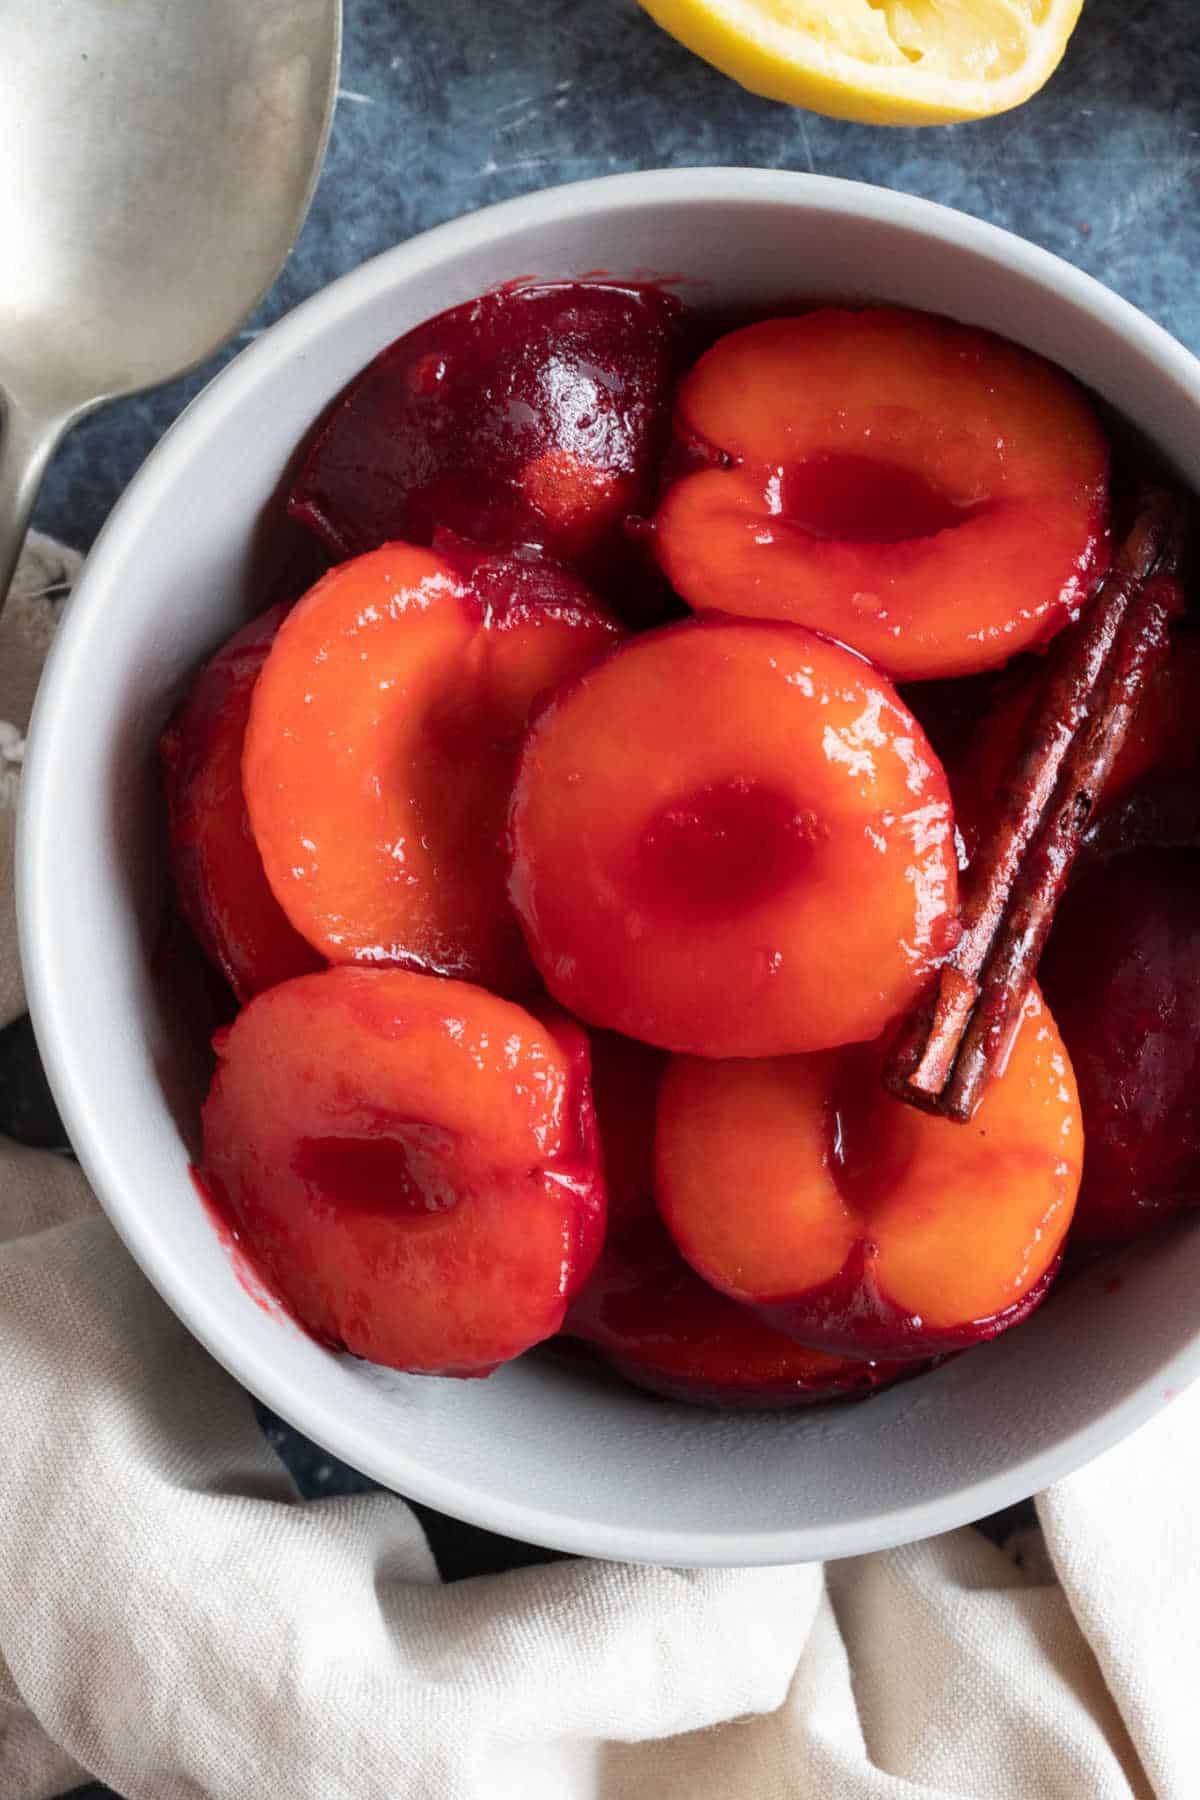 Stewed plums with cinnamon stick in a bowl.